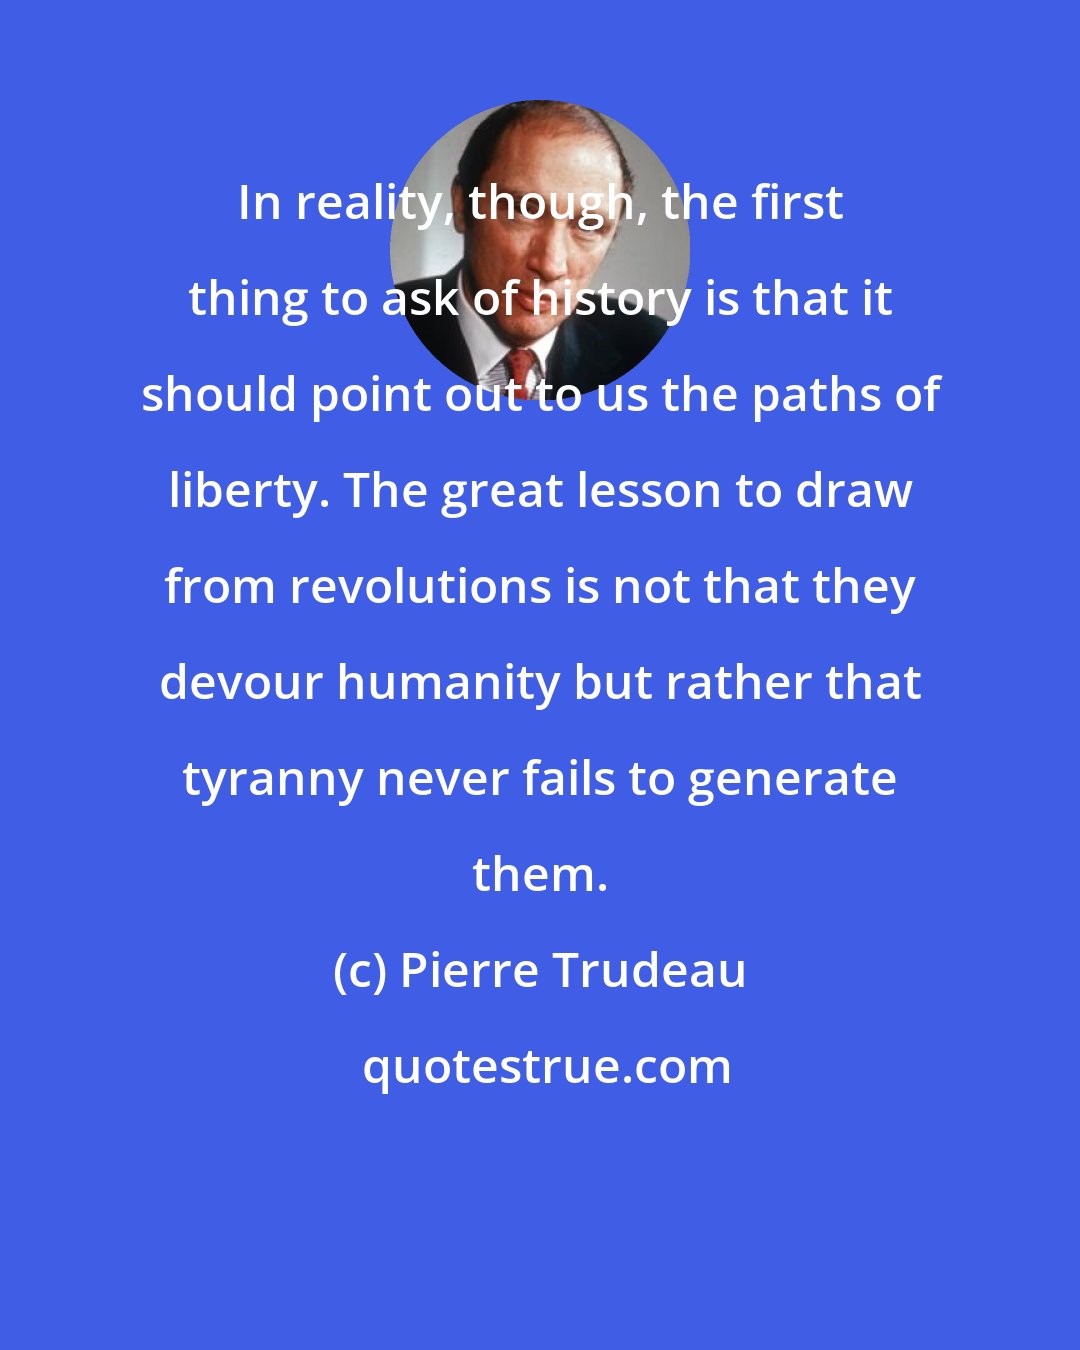 Pierre Trudeau: In reality, though, the first thing to ask of history is that it should point out to us the paths of liberty. The great lesson to draw from revolutions is not that they devour humanity but rather that tyranny never fails to generate them.